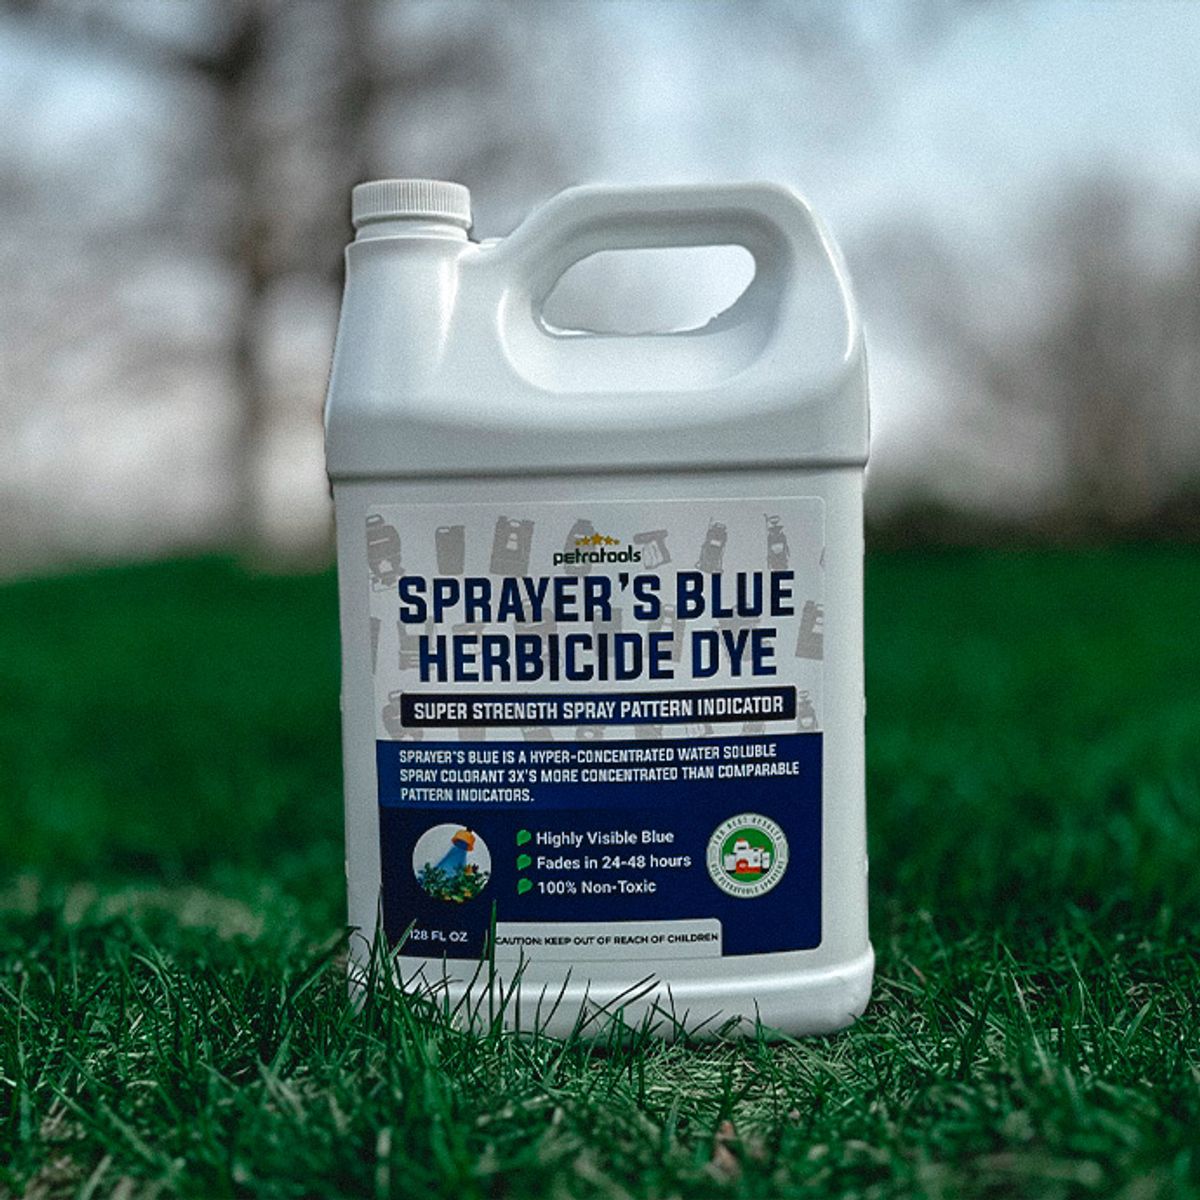 What's in Sprayer's Blue?